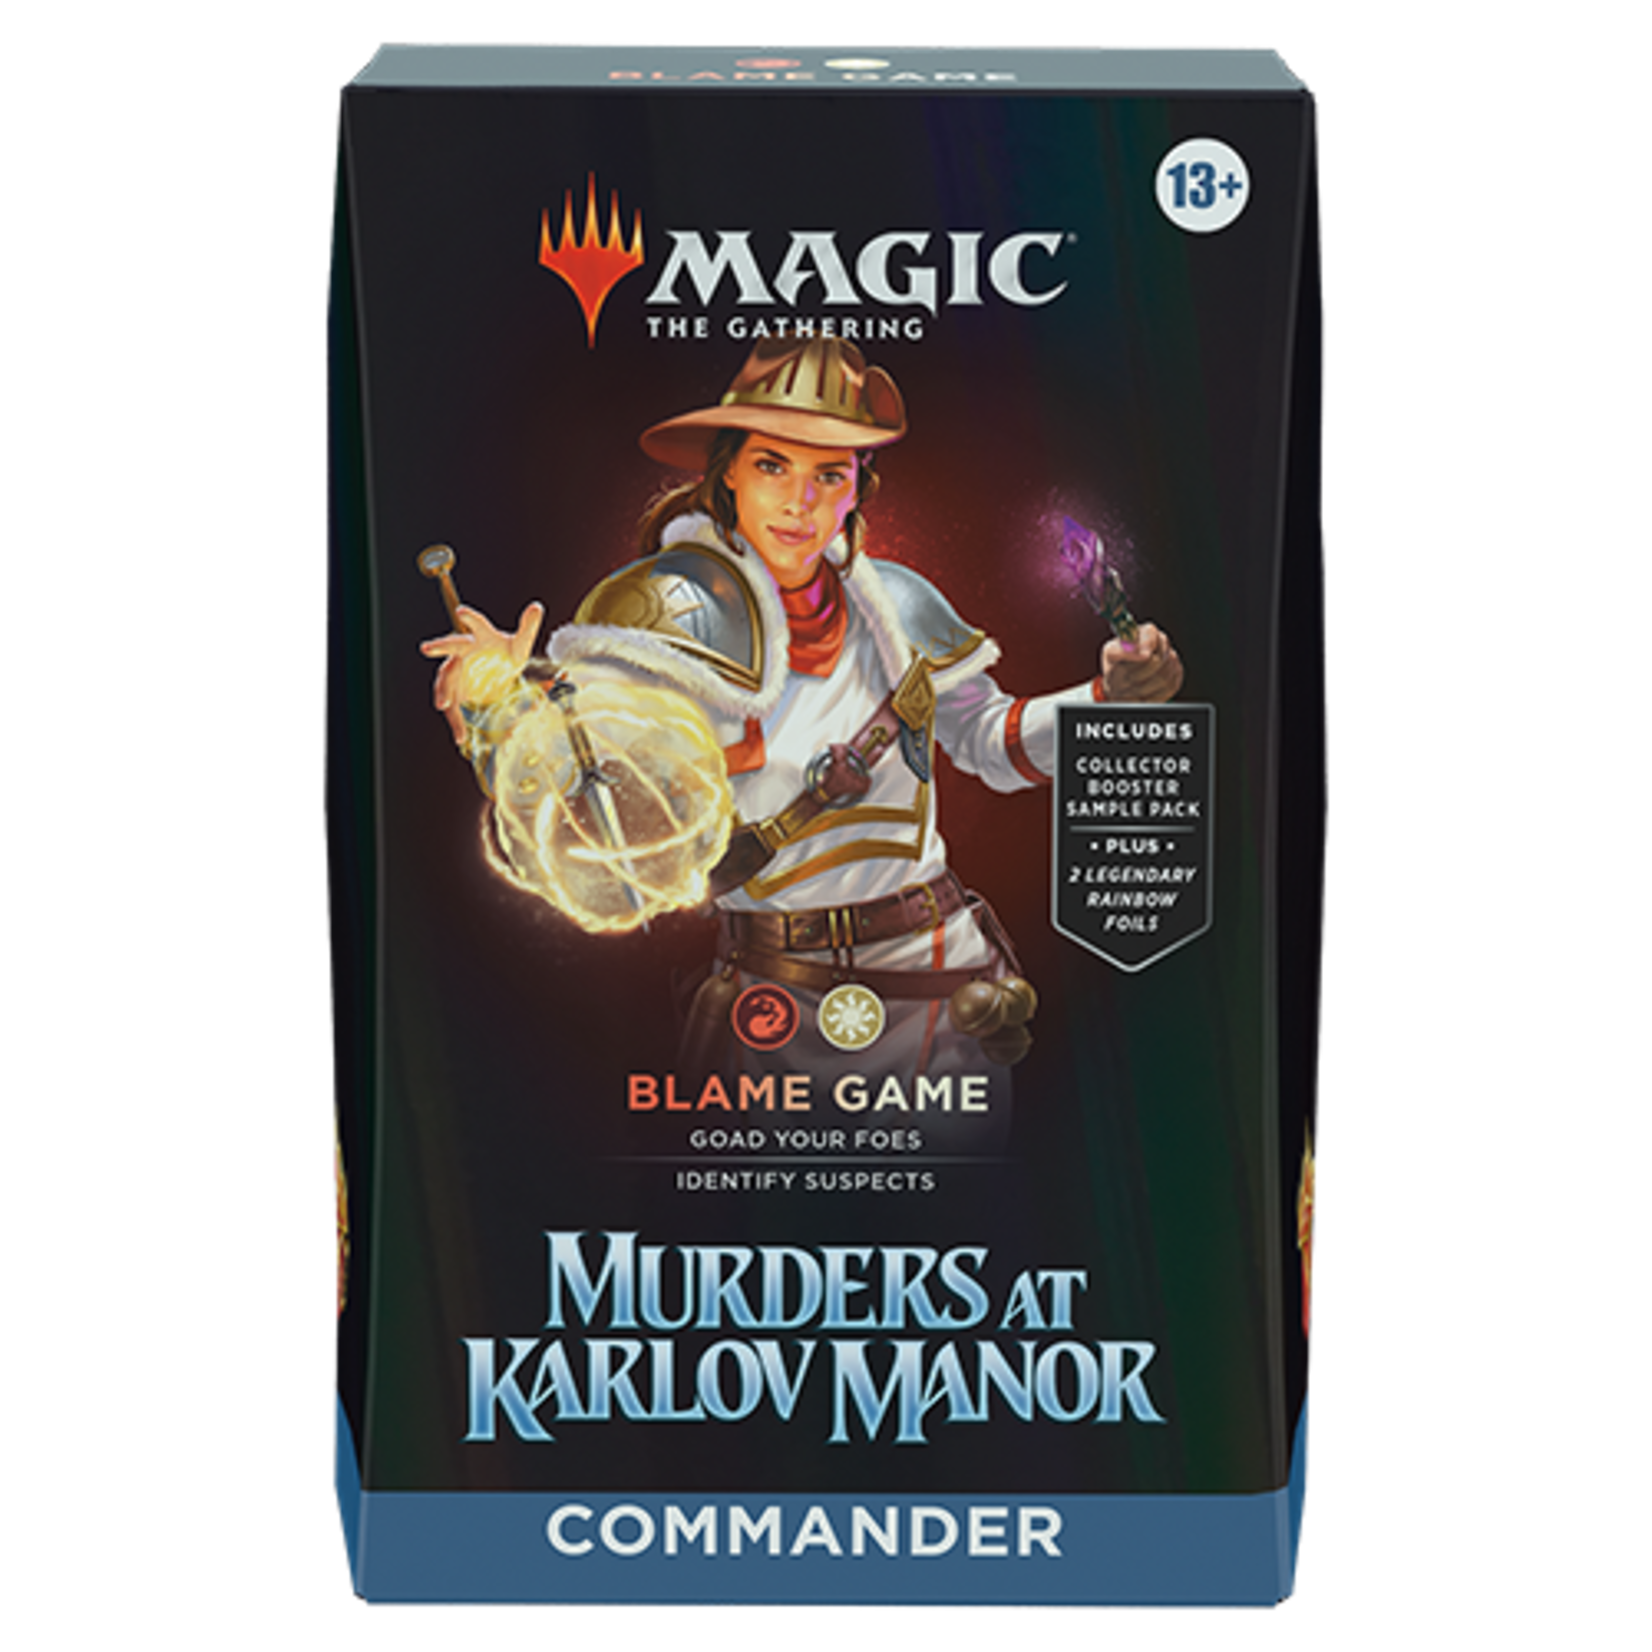 Wizards of the Coast Magic the Gathering CCG: Murders at Karlov Manor Commander Deck  - Blame Game